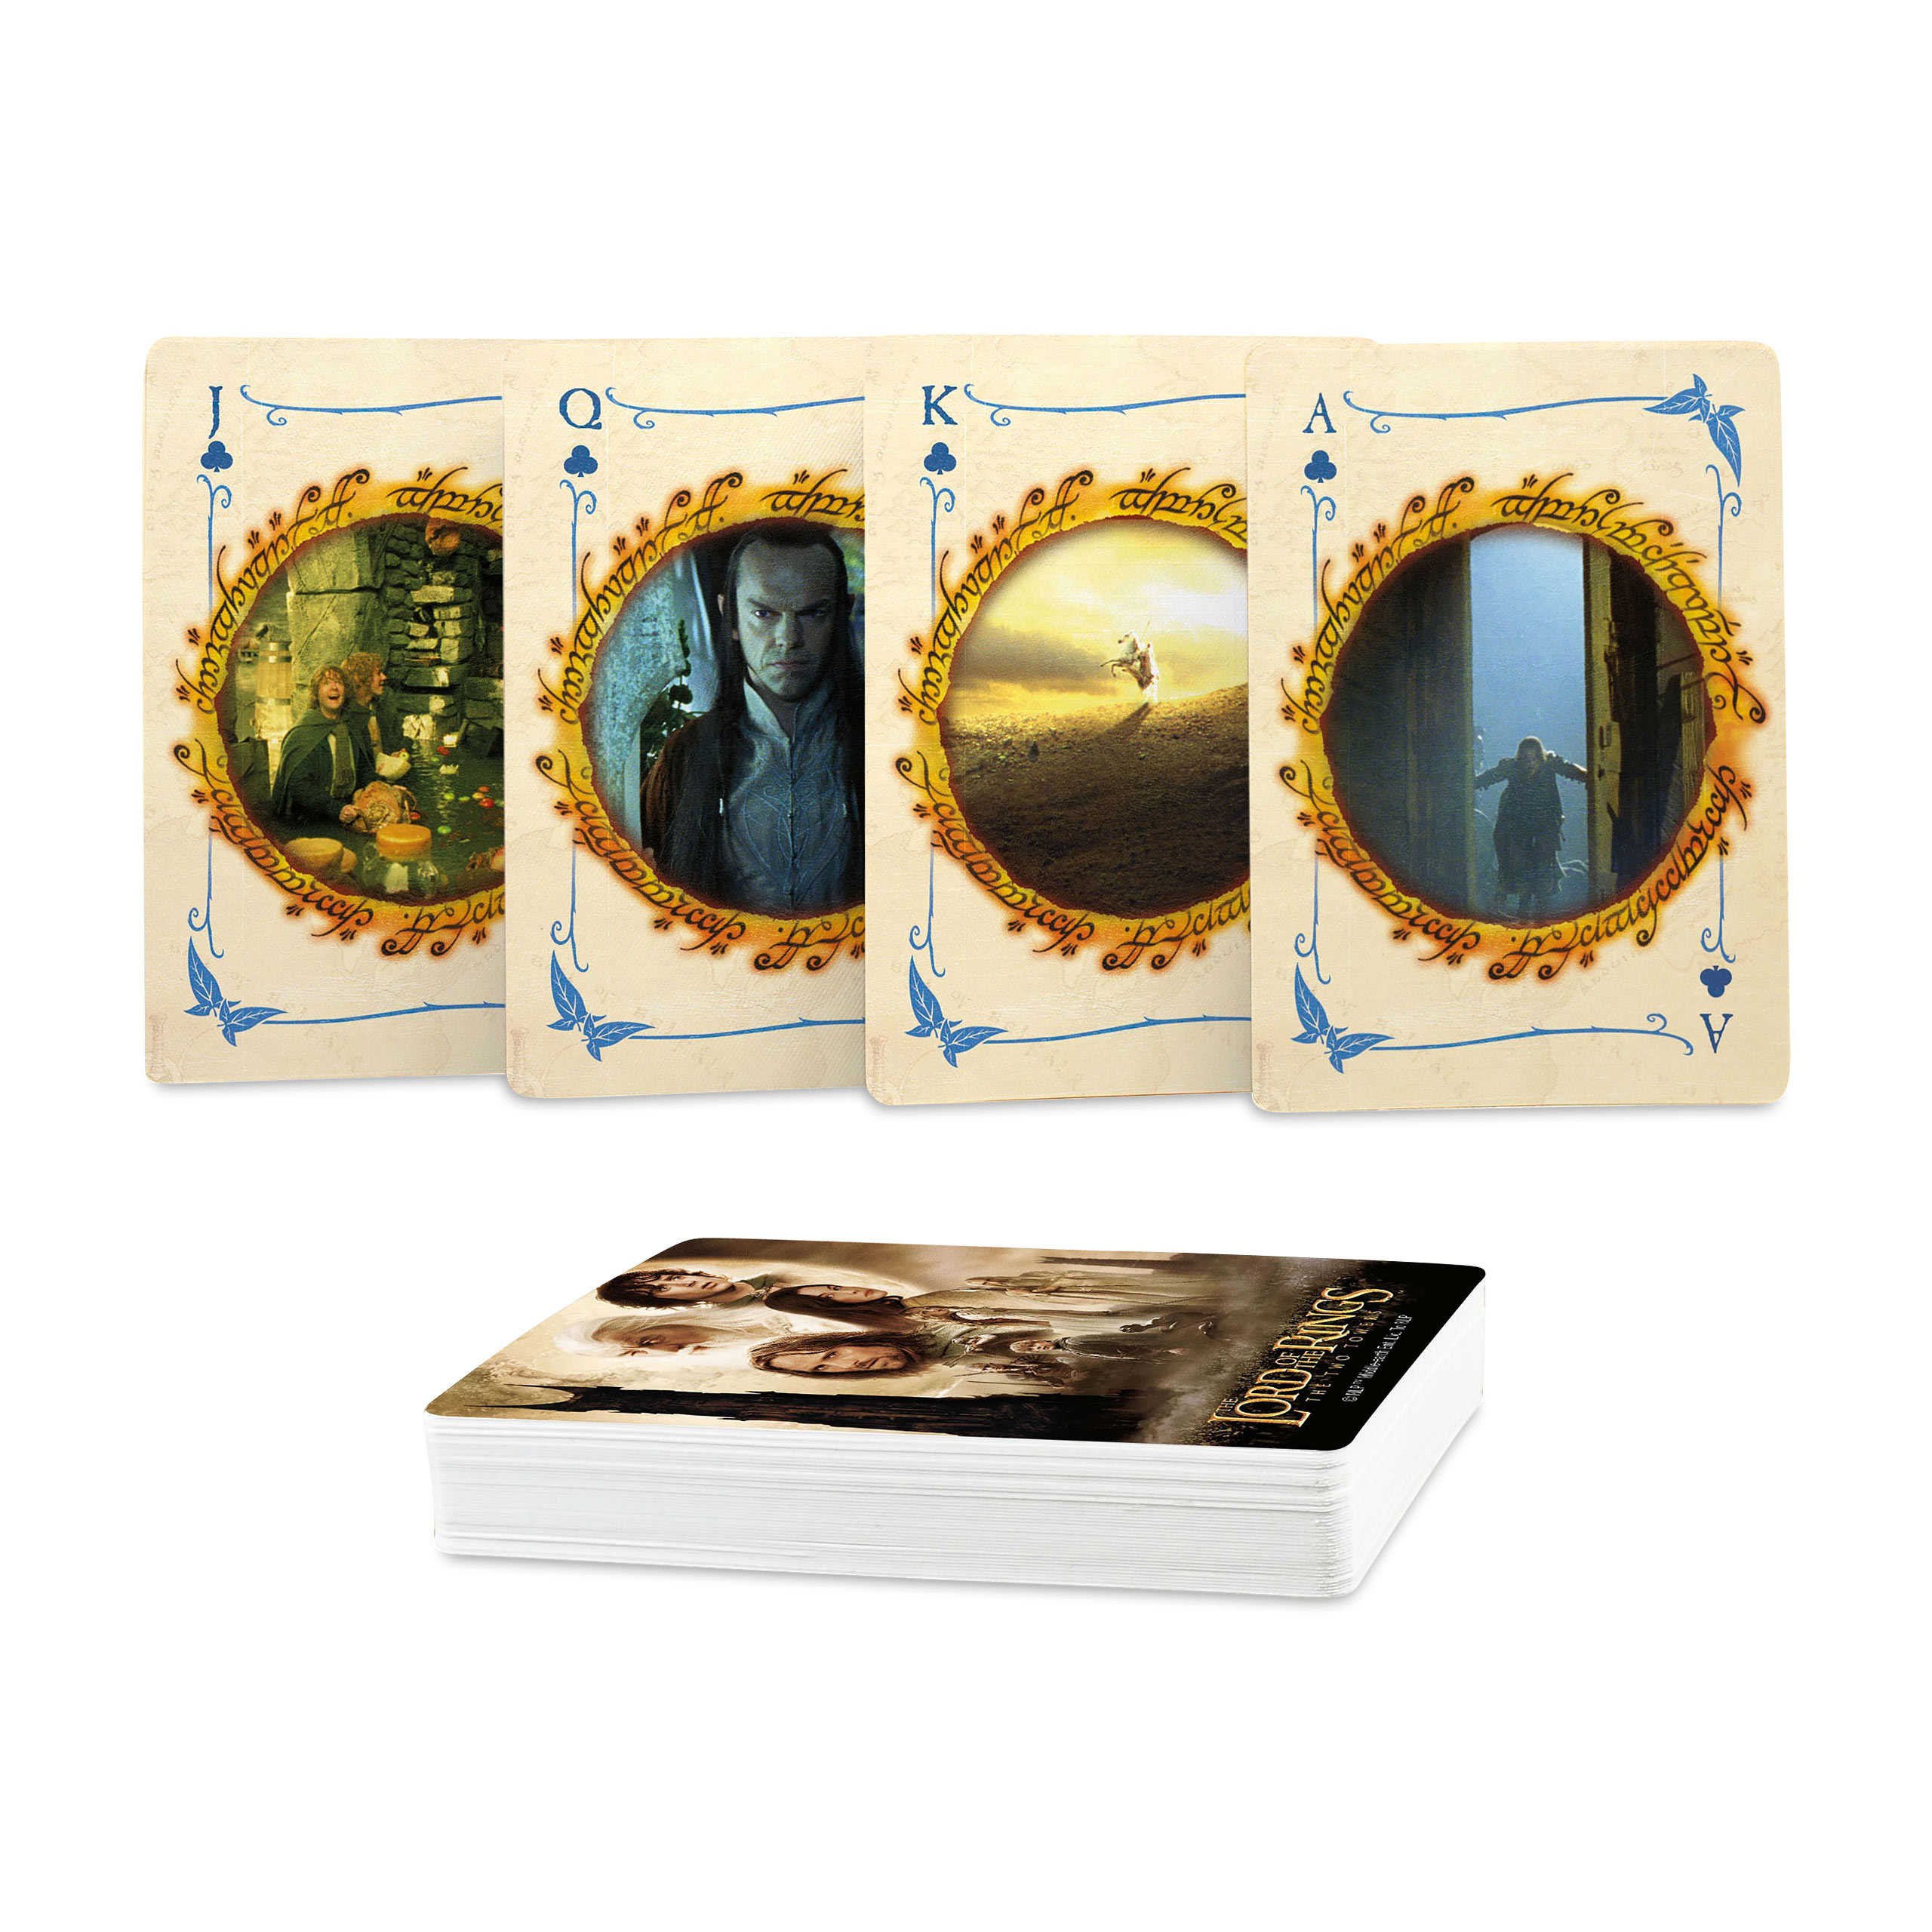 Lord of the Rings - The Two Towers Playing Cards